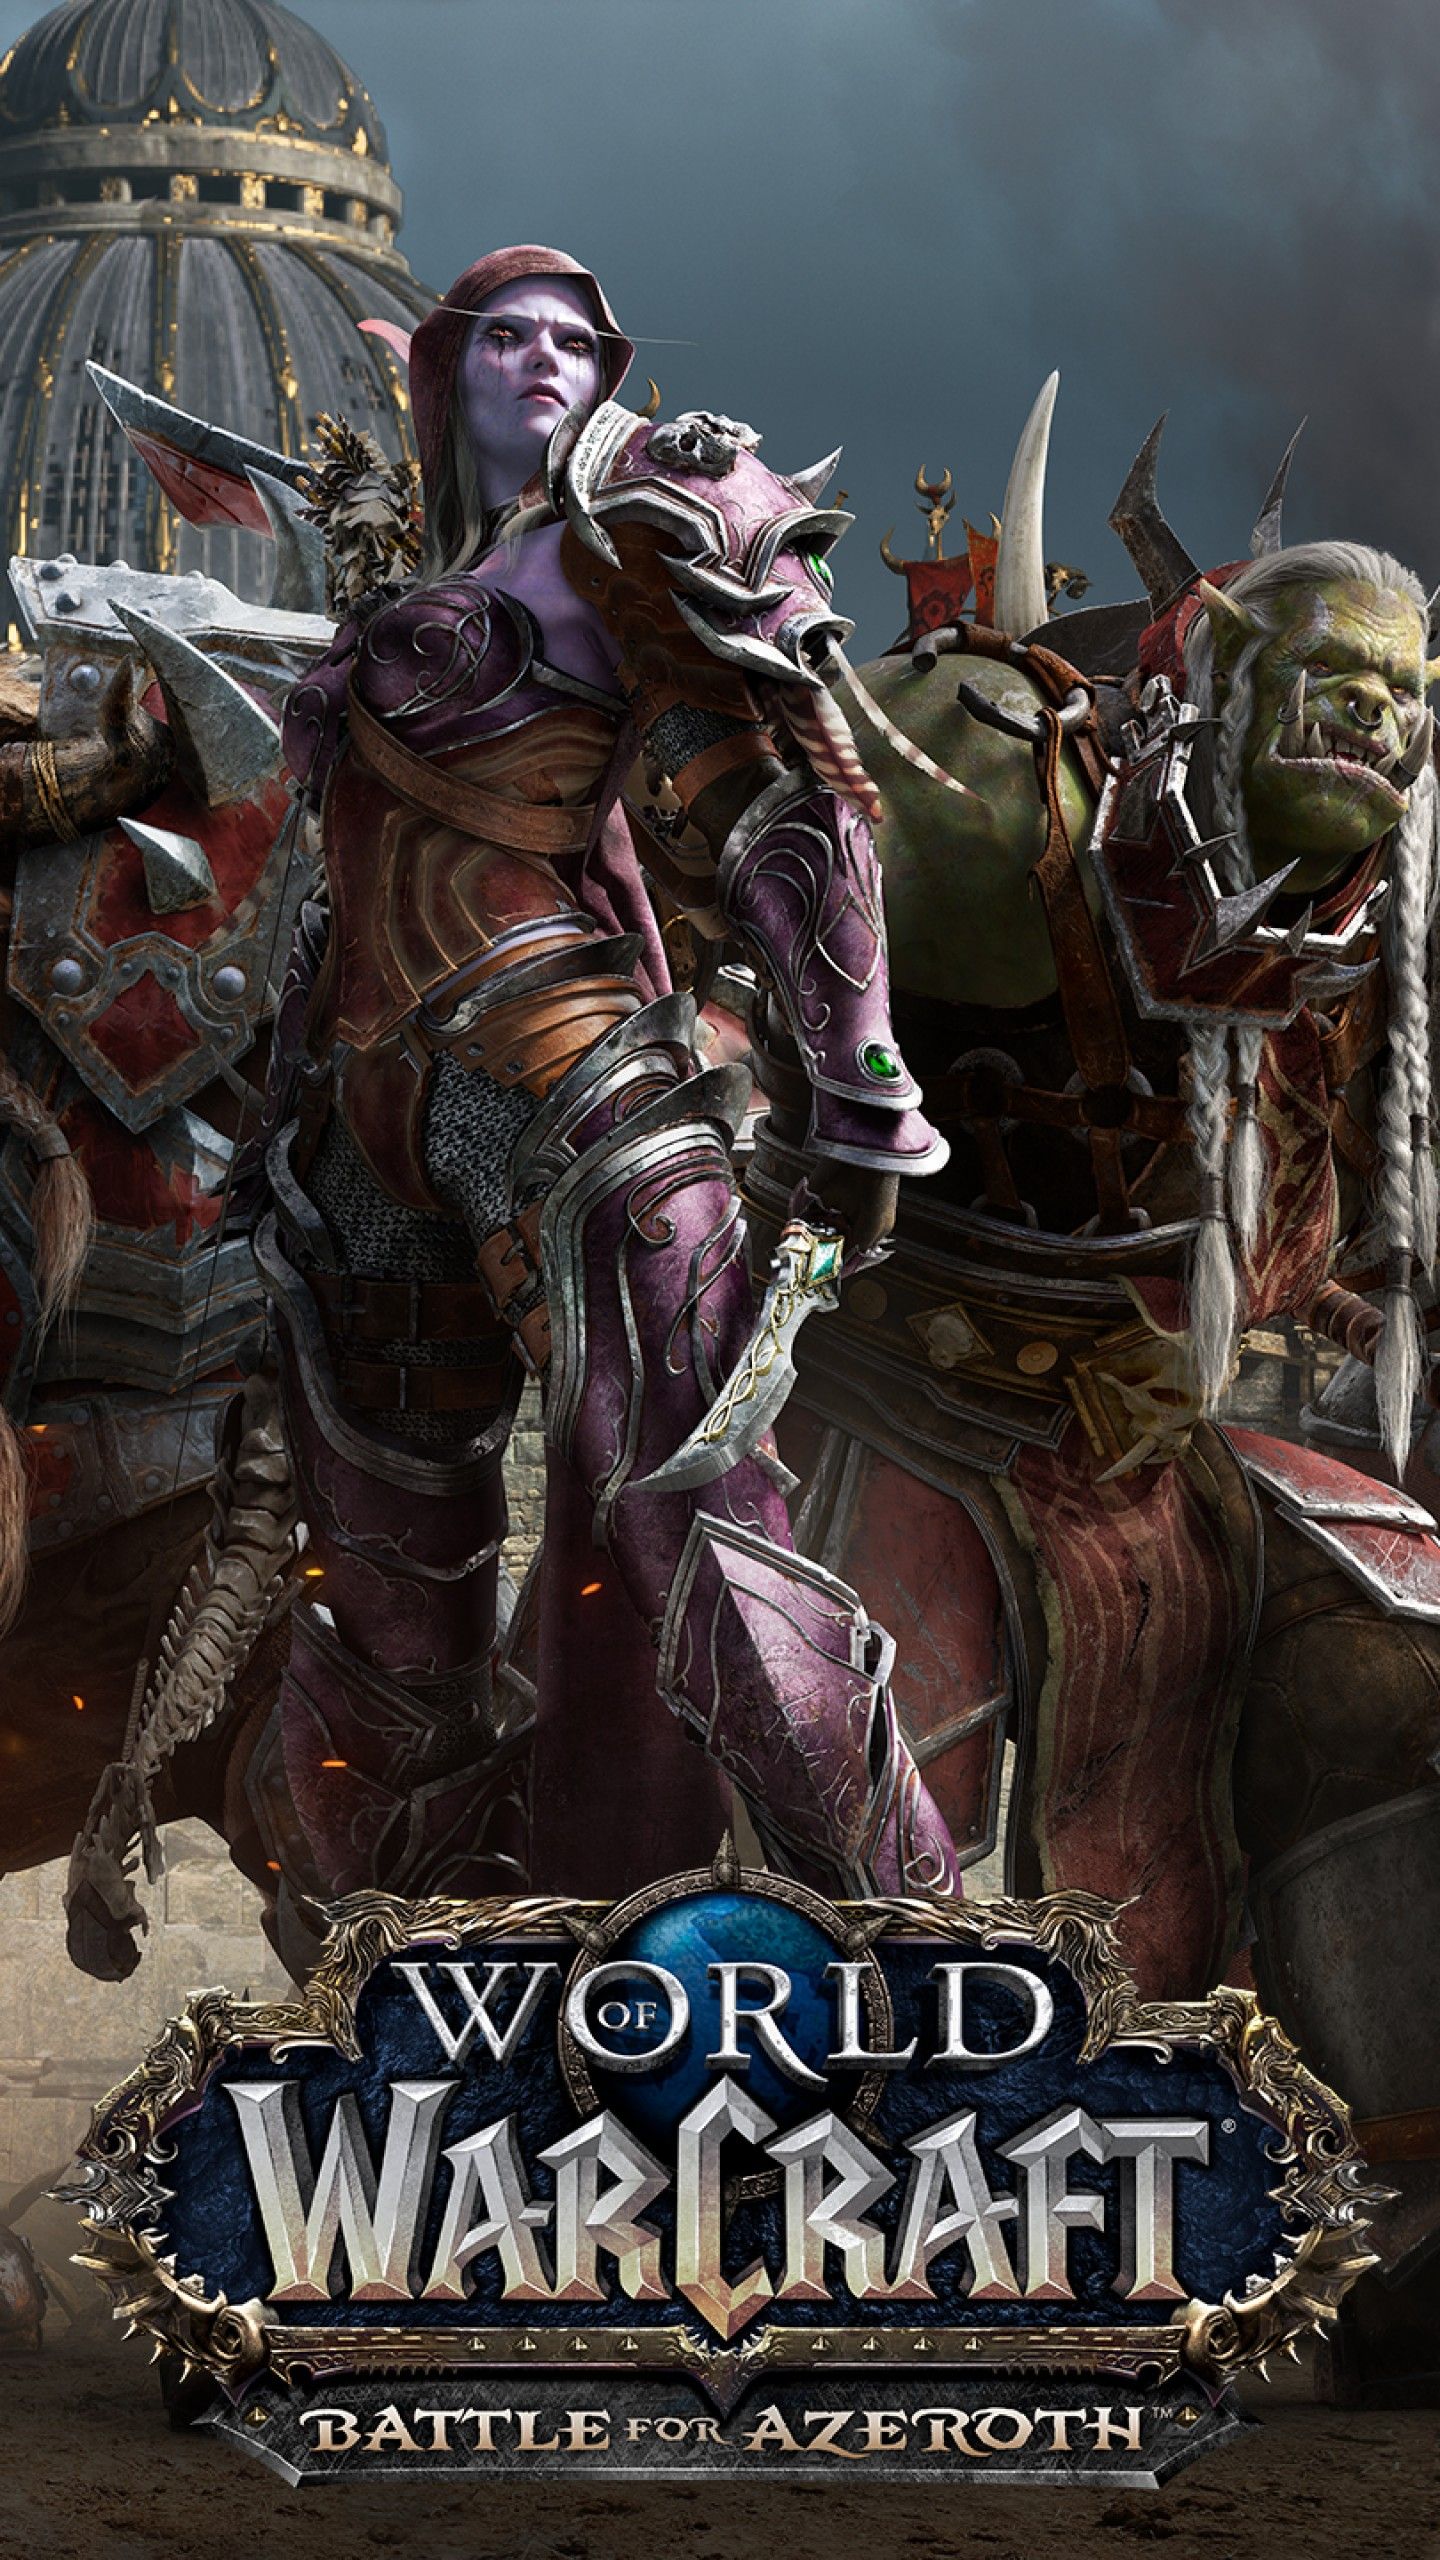 world of warcraft battle for azerothWallpapers